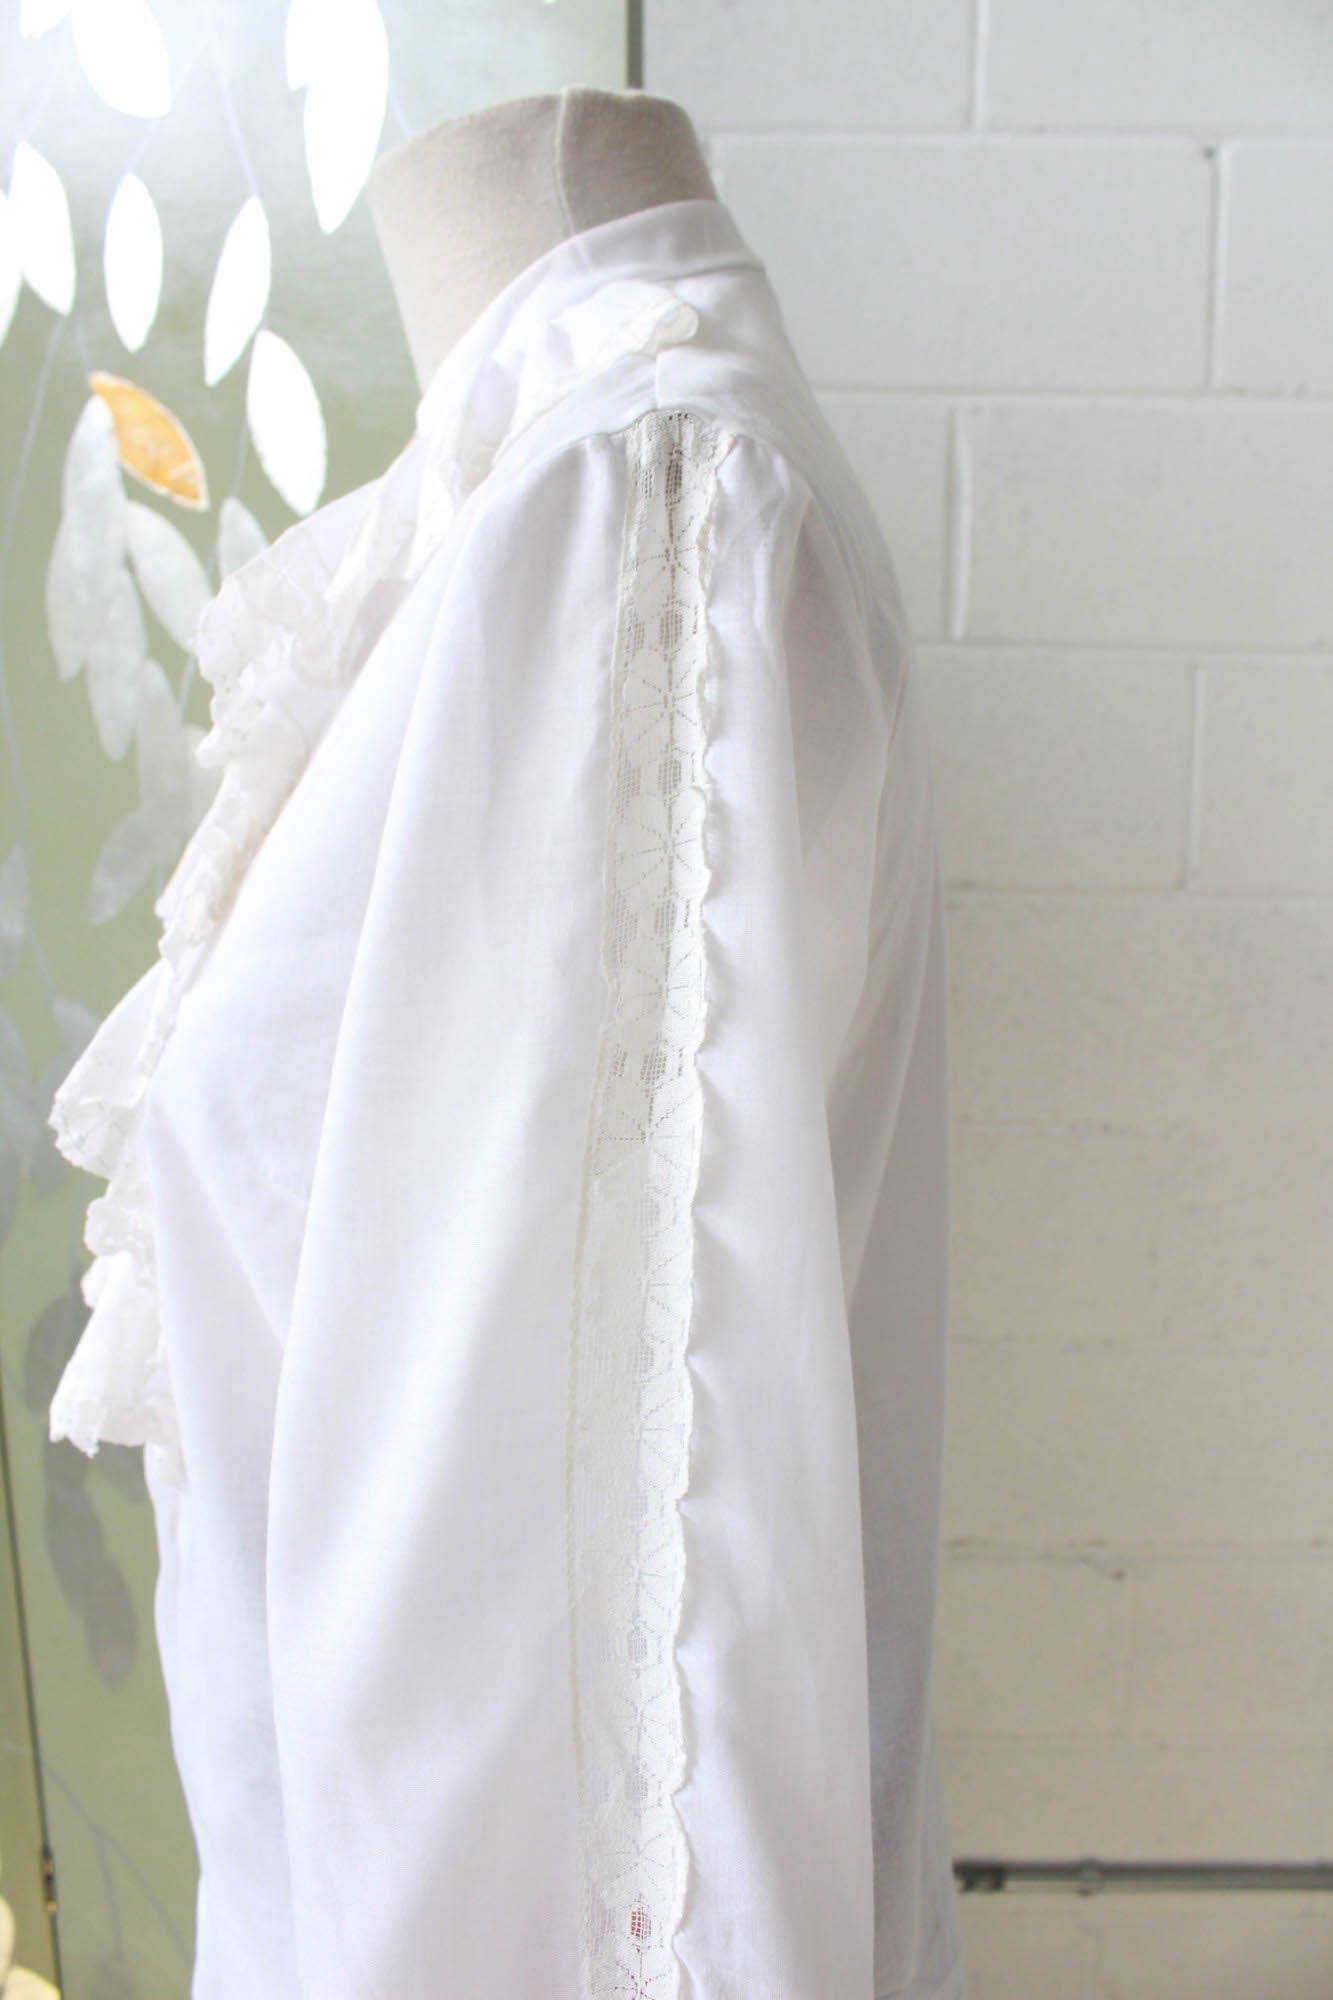 1960s /70s white cotton blouse with lace trimmed ruffle jabot collar, button up front, long sleeve vintage white blouse